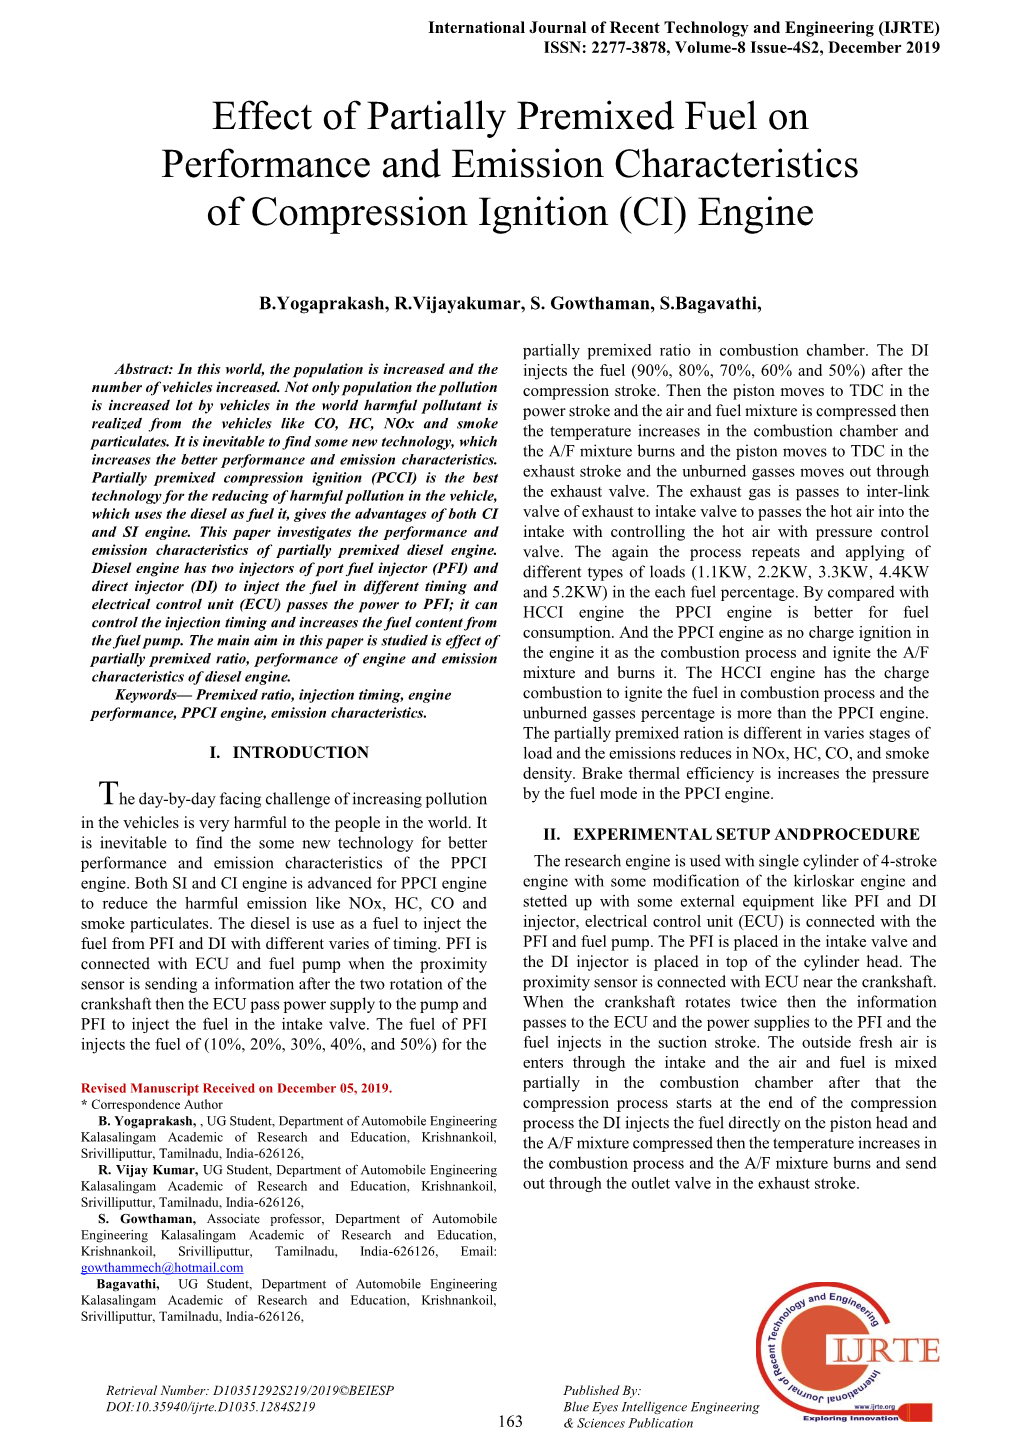 Effect of Partially Premixed Fuel on Performance and Emission Characteristics of Compression Ignition (CI) Engine